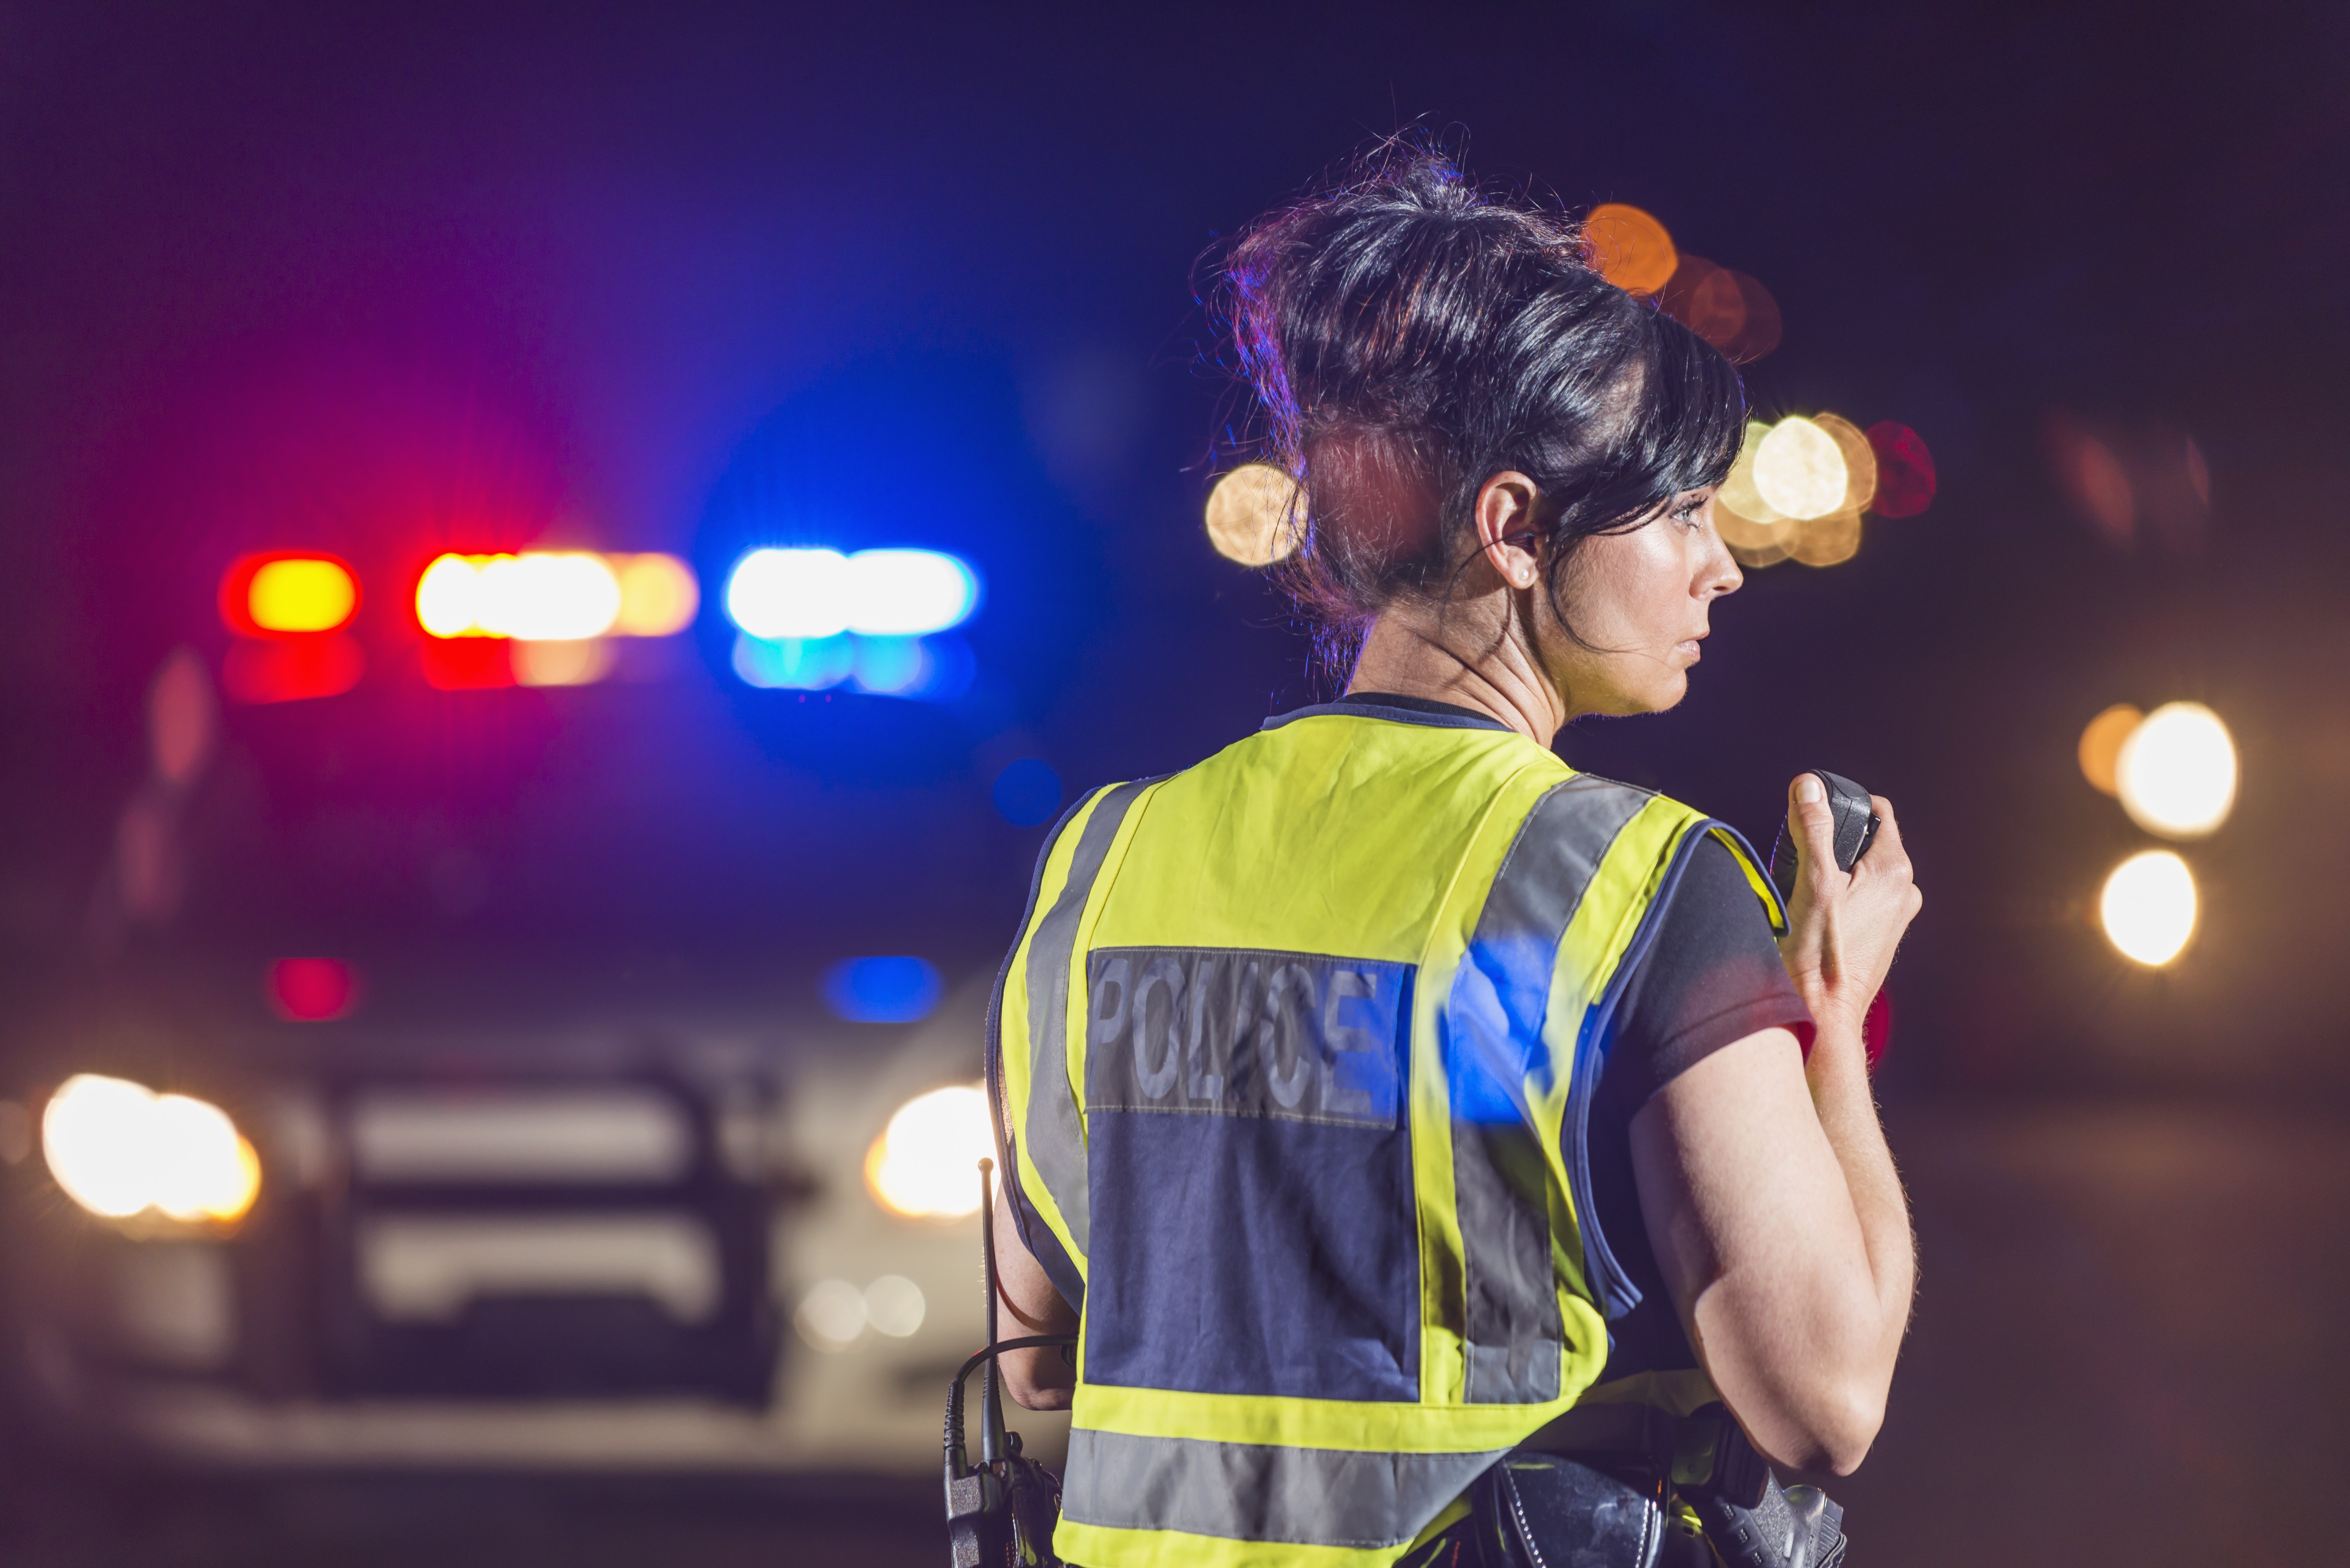 Rear view of a female police officer standing in the street at night, talking into her radio. Her patrol car is in the background with the emergency lights illuminated. She is wearing a yellow safety vest|Photo: Getty Images